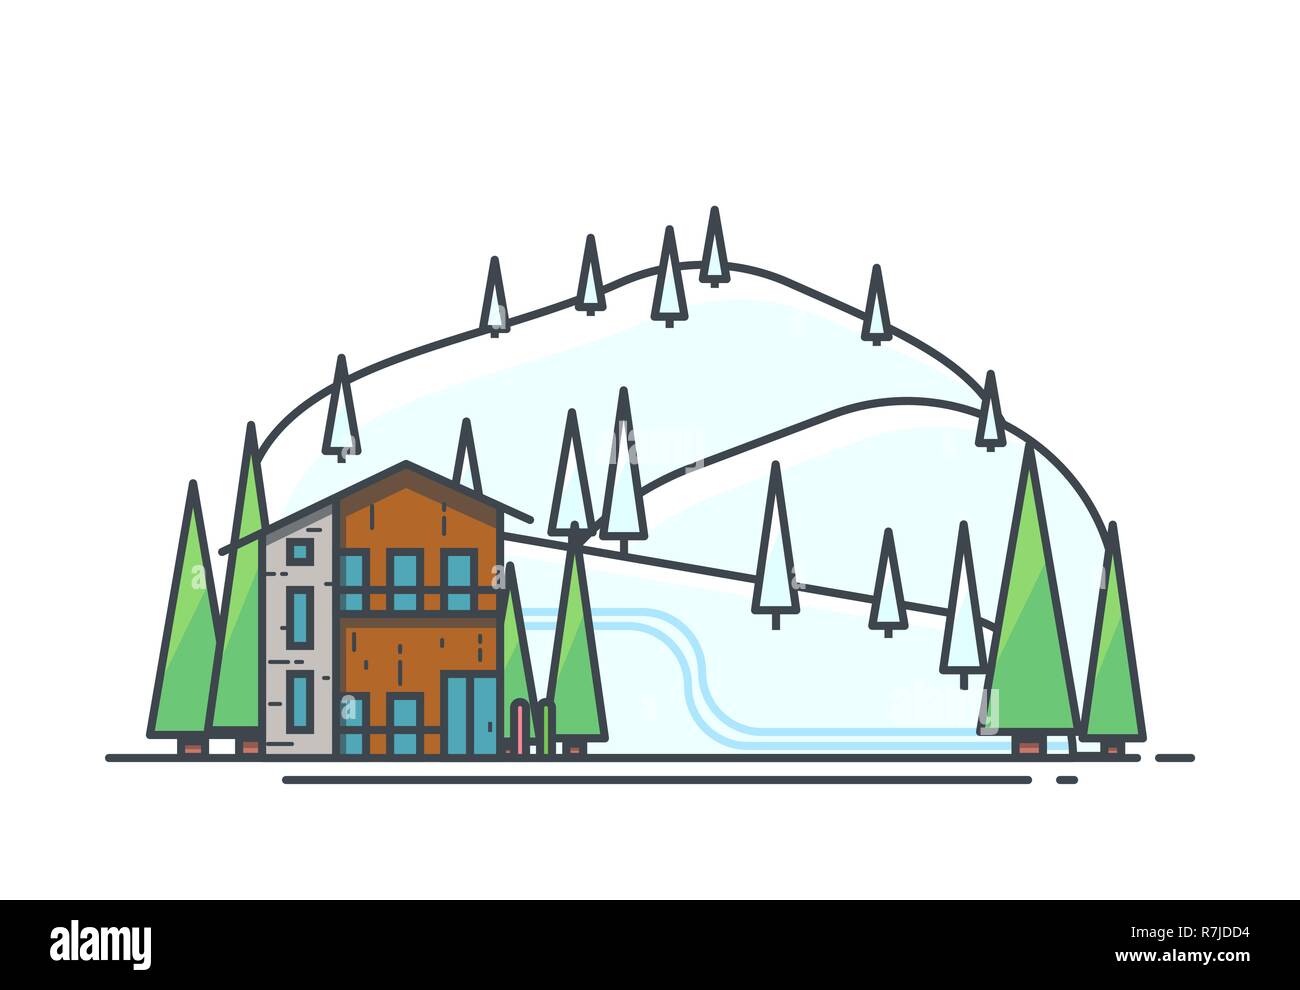 Ski resort vacation. Big modern vacation wooden house surrounded with trees. Mountains and hills covered with snow and trees. Modern line vector illus Stock Vector